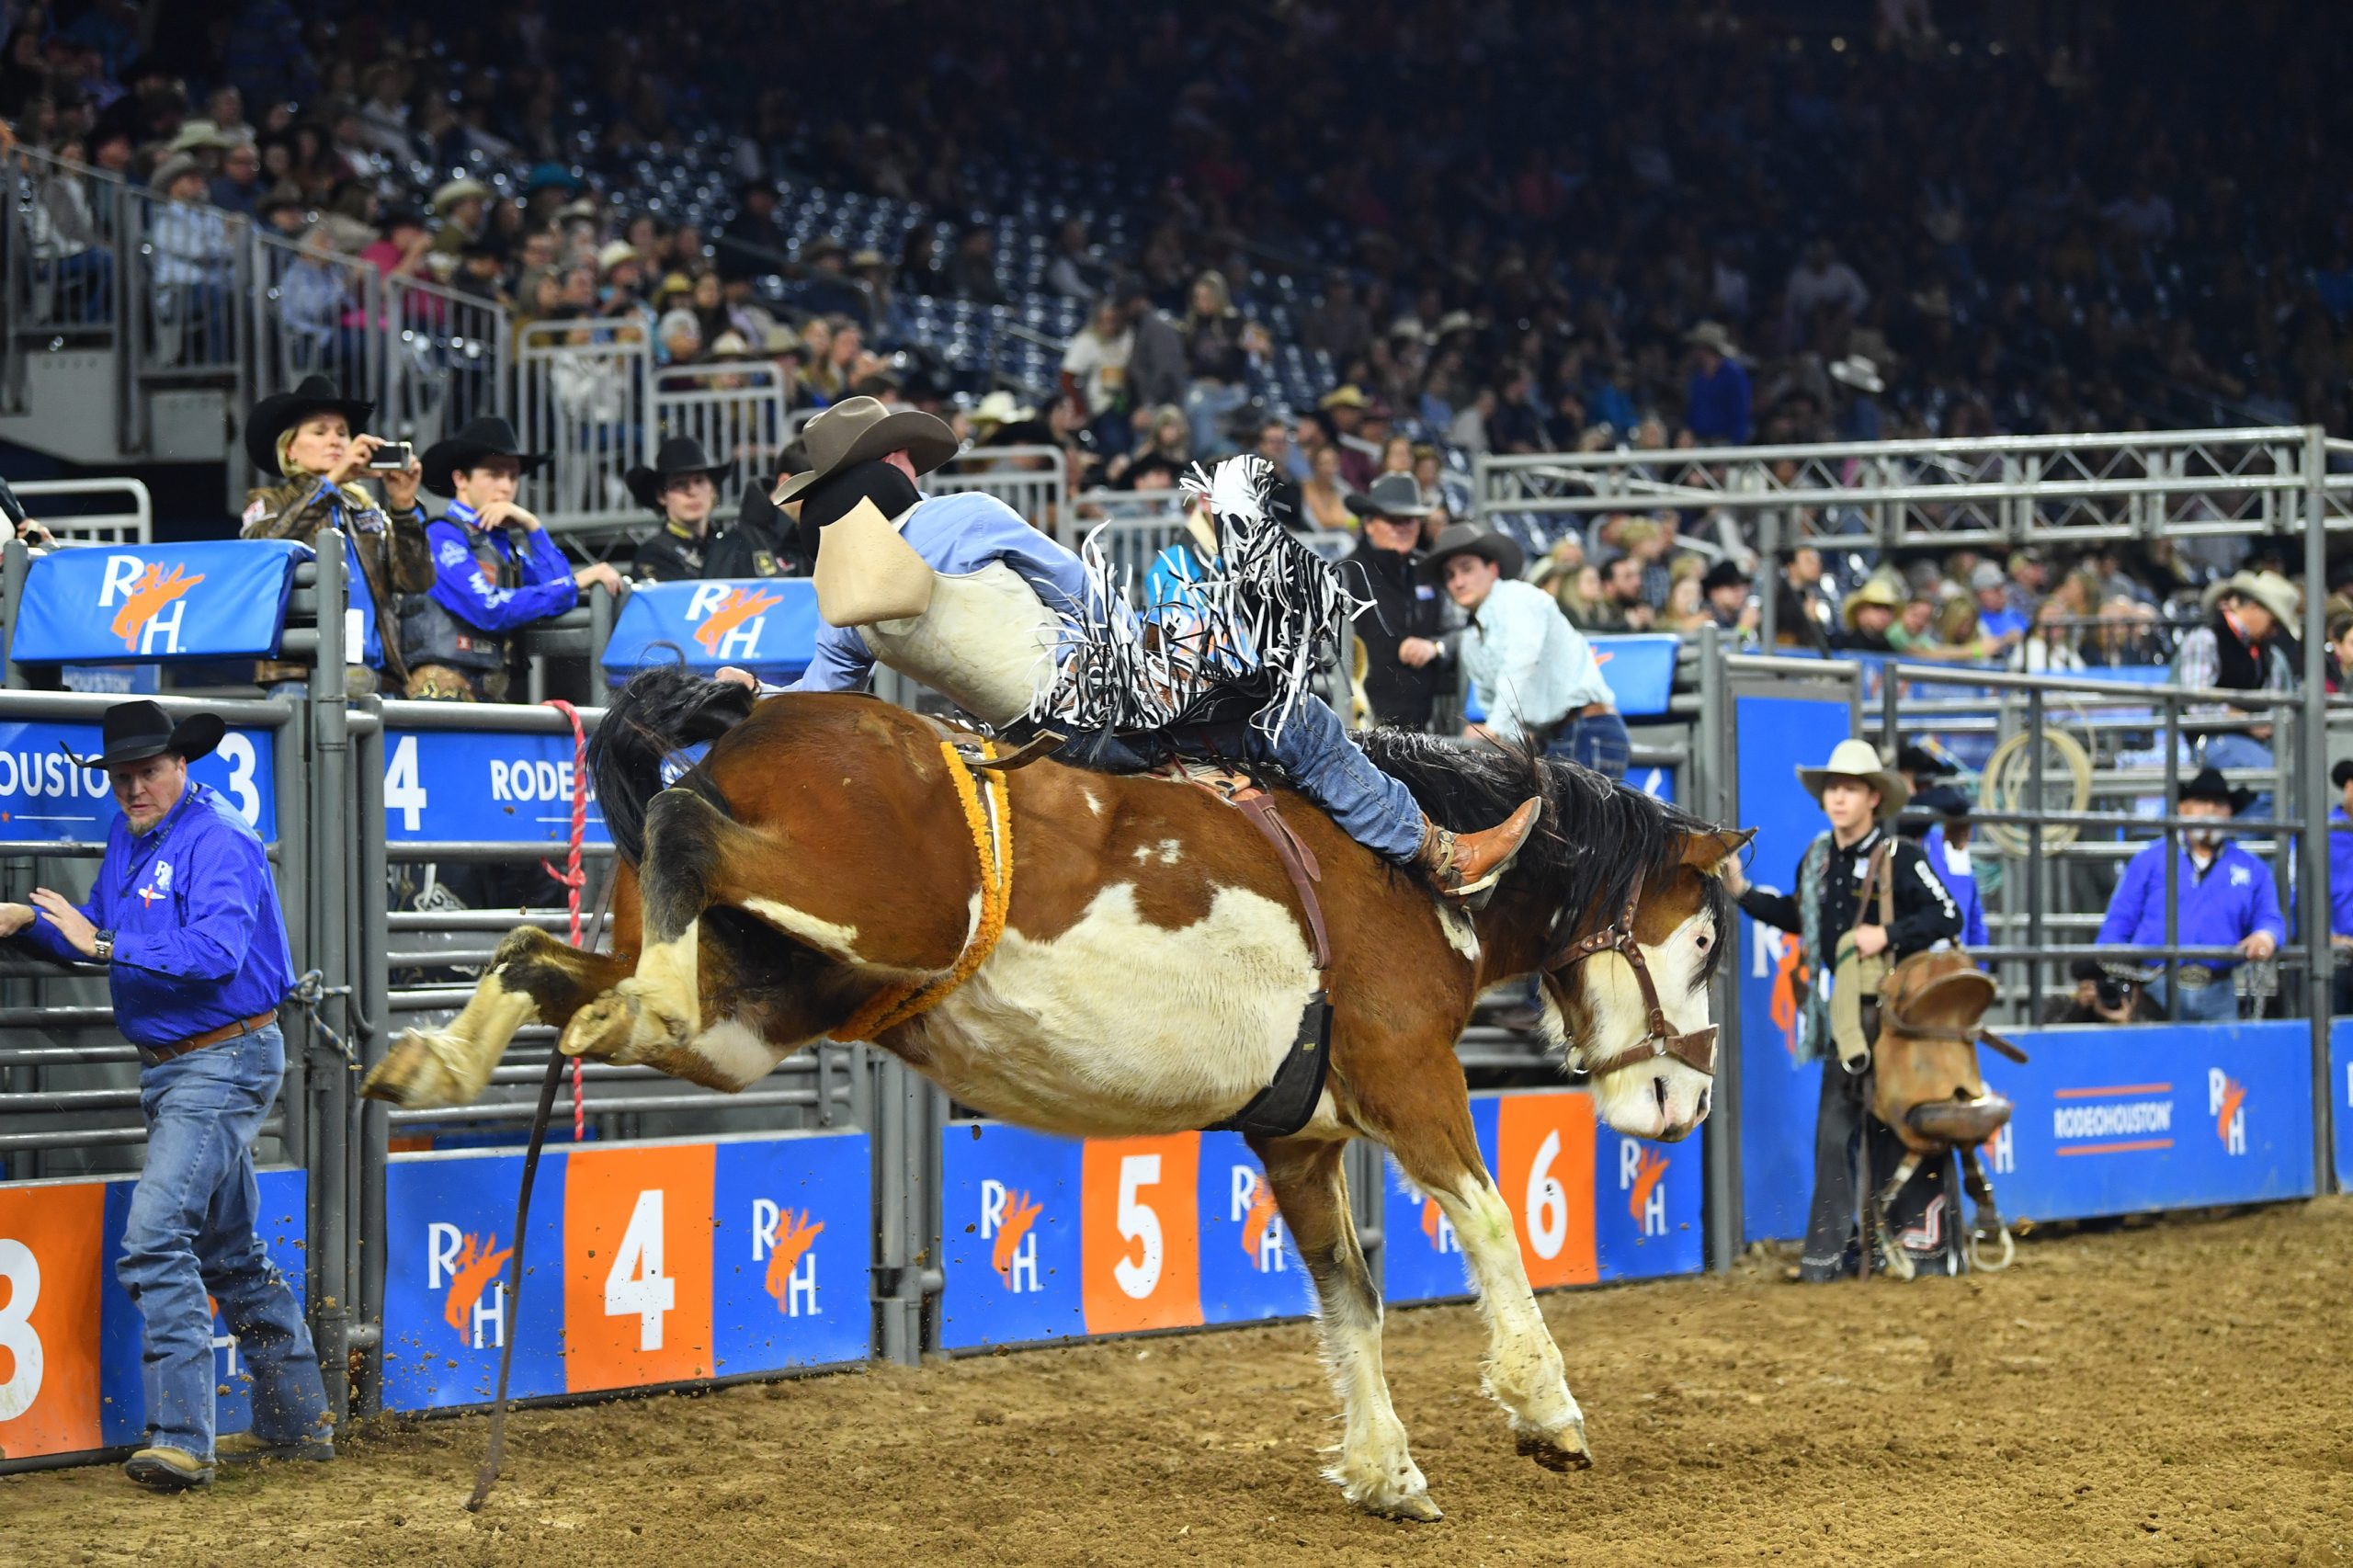 Telestreams Lightspeed Live Stream Shares the Houston Livestock Show and Rodeo Experience